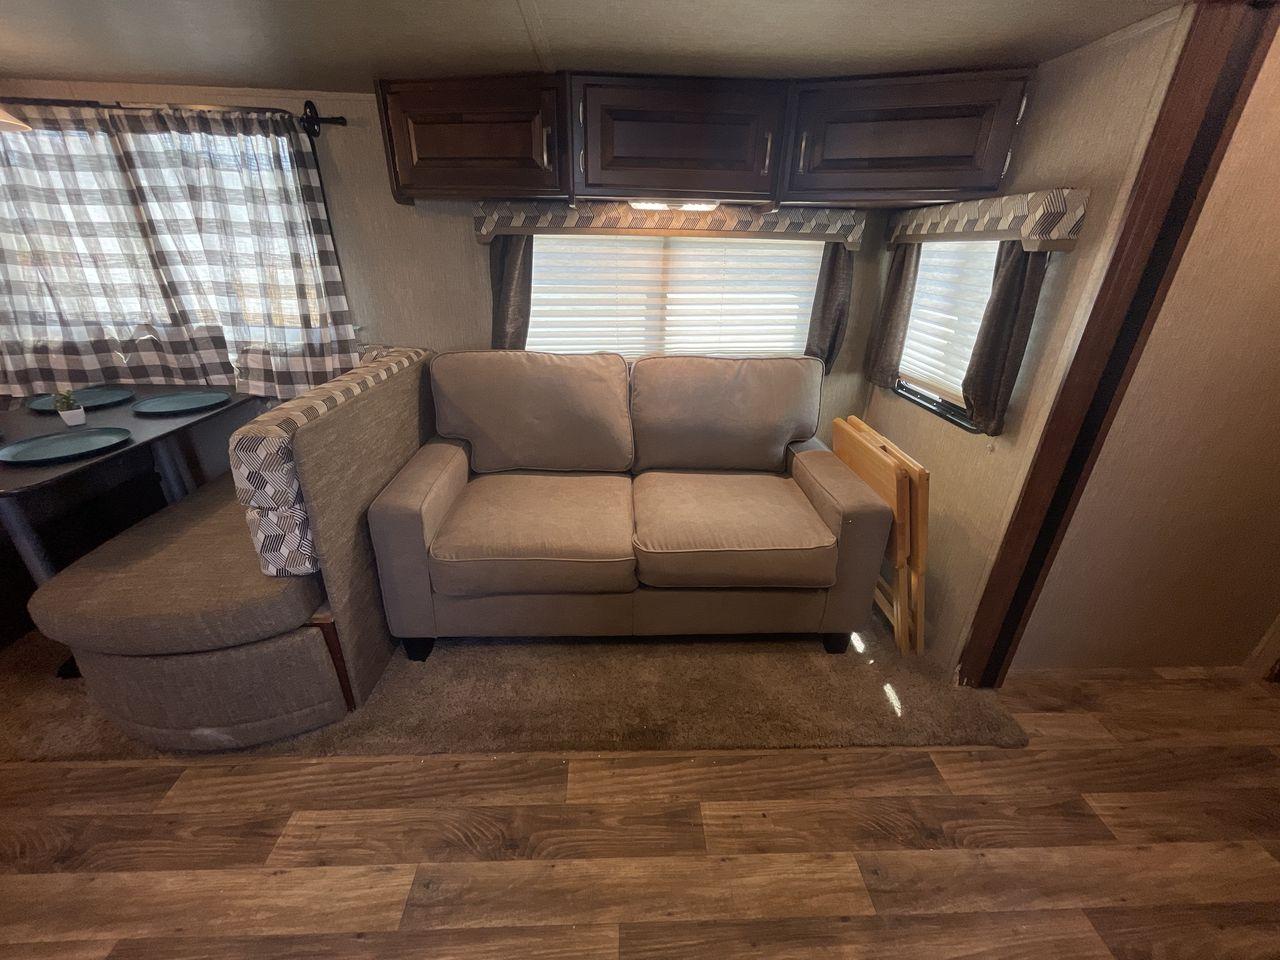 2018 BLACK KEYSTONE RV OUTBACK 325BH (4YDT32520JB) , Length: 37.42 ft. | Dry Weight: 8,428 lbs. | Gross Weight: 10,500 lbs. | Slides: 3 transmission, located at 4319 N Main St, Cleburne, TX, 76033, (817) 678-5133, 32.385960, -97.391212 - Gather the family inside this Outback Super Lite 325BH by Keystone RV, which features a bunkhouse, front bedroom, outside kitchen, and triple slides. The dimensions of this 325BH model are 37.42 ft in length, 8 ft in width, and 11.33 ft in height. It has a dry weight of 8,428 lbs with a payload capa - Photo #14